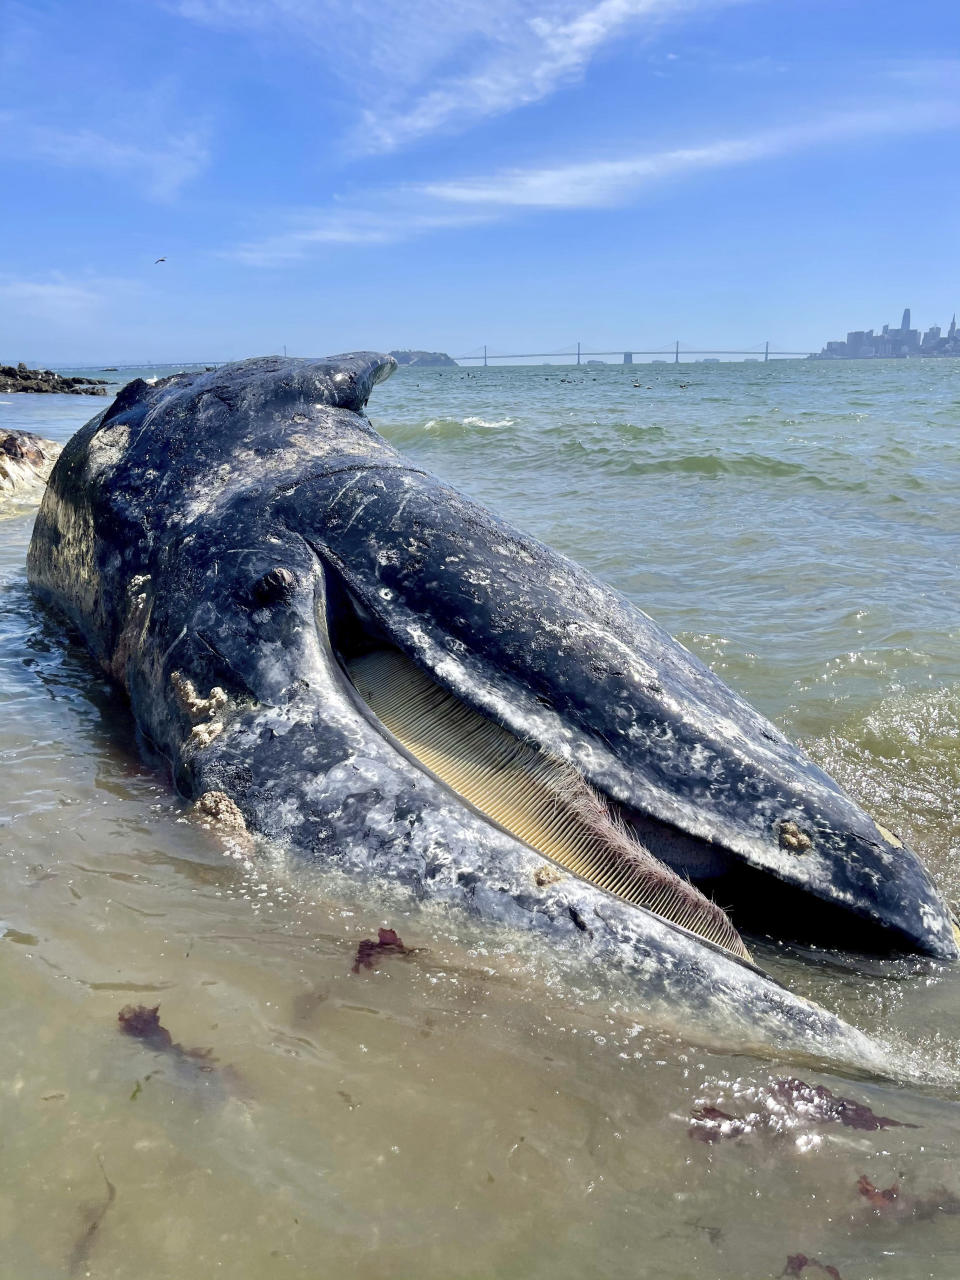 This photo Thursday, April 8, 2021 photo provided by The Marine Mammal Center shows a subadult male gray whale on Angel Island State Park via San Francisco Bay, Berkeley Marina cause of death was undetermined. Four dead gray whales have washed ashore San Francisco Bay Area beaches in the last nine days and experts said Friday, April 9, 2021, one was struck by a ship. They were trying to determine how the other three died. "It's alarming to respond to four dead gray whales in just over a week because it really puts into perspective the current challenges faced by this species," says Dr. Pádraig Duignan, Director of Pathology at The Marine Mammal Center. (The Marine Mammal Center via AP)